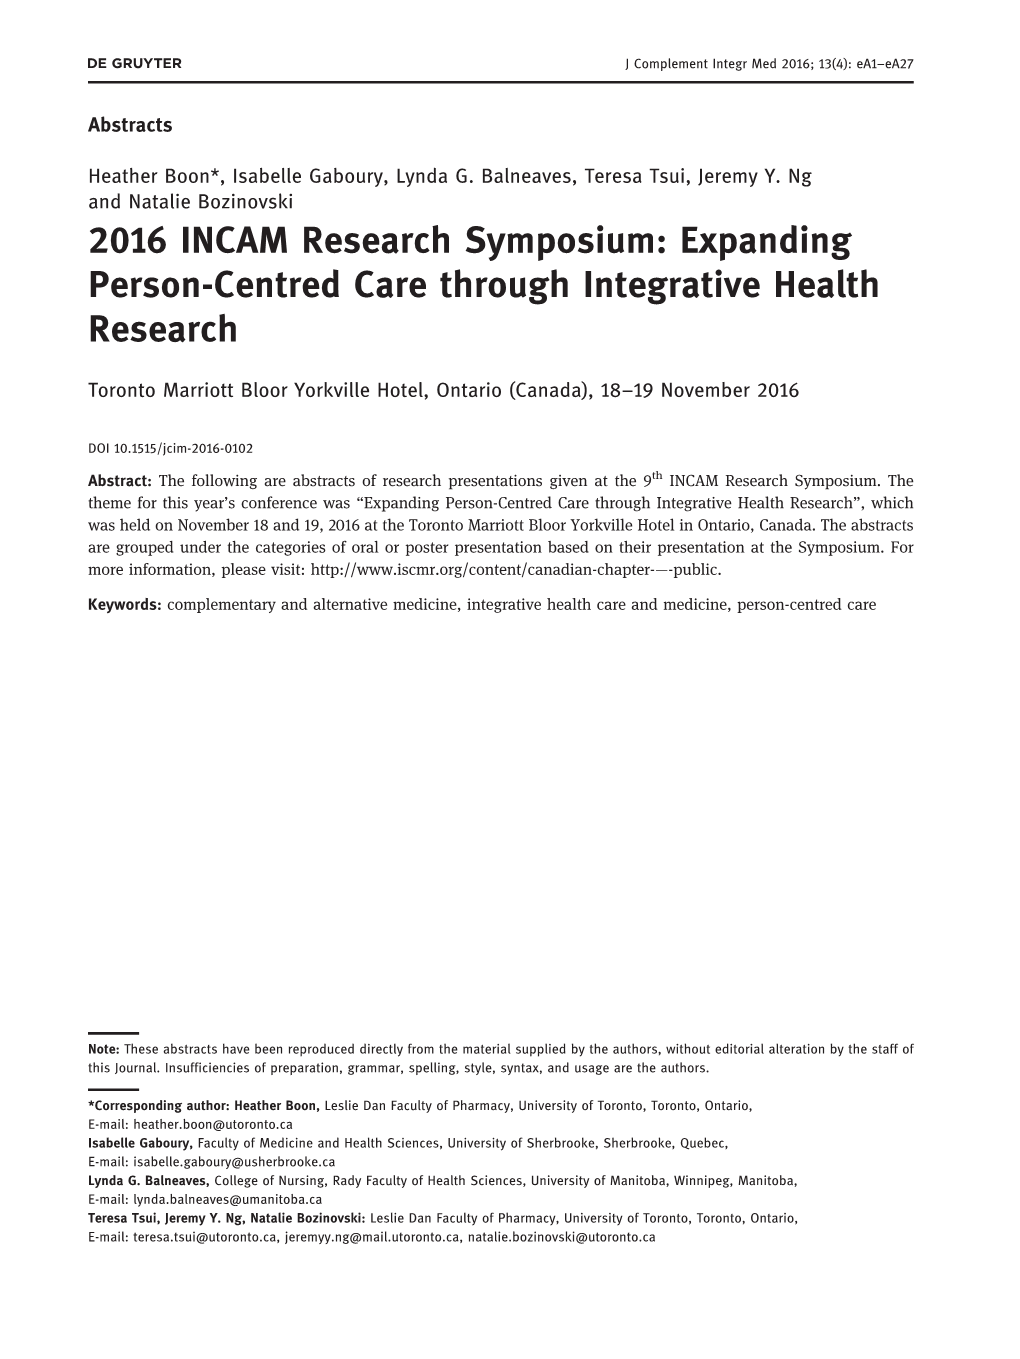 2016 INCAM Research Symposium: Expanding Person-Centred Care Through Integrative Health Research